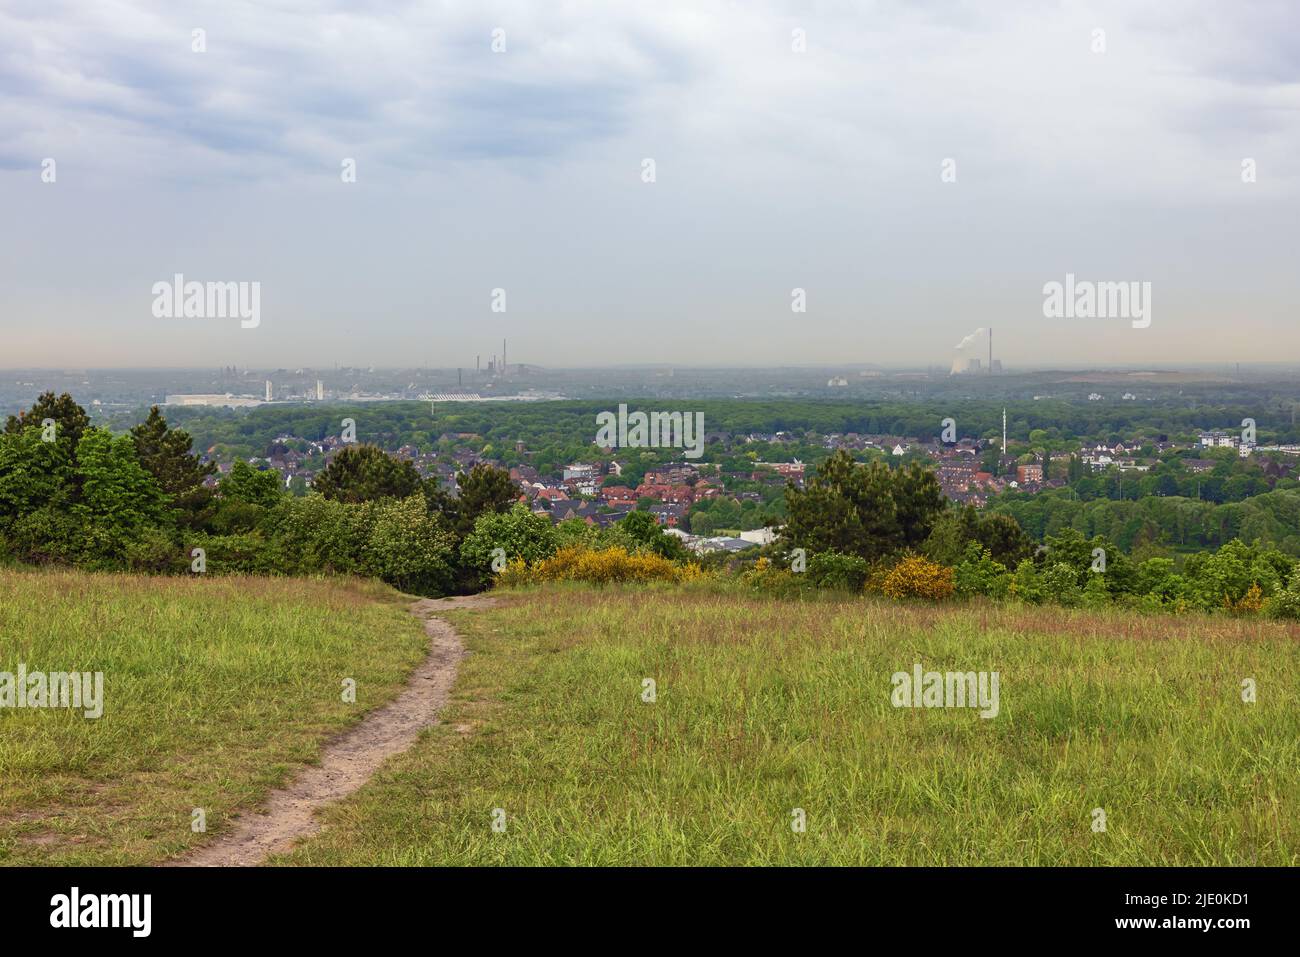 Overview of the Ruhr area from the Halde Haniel with several heavy industries on the horizon Stock Photo